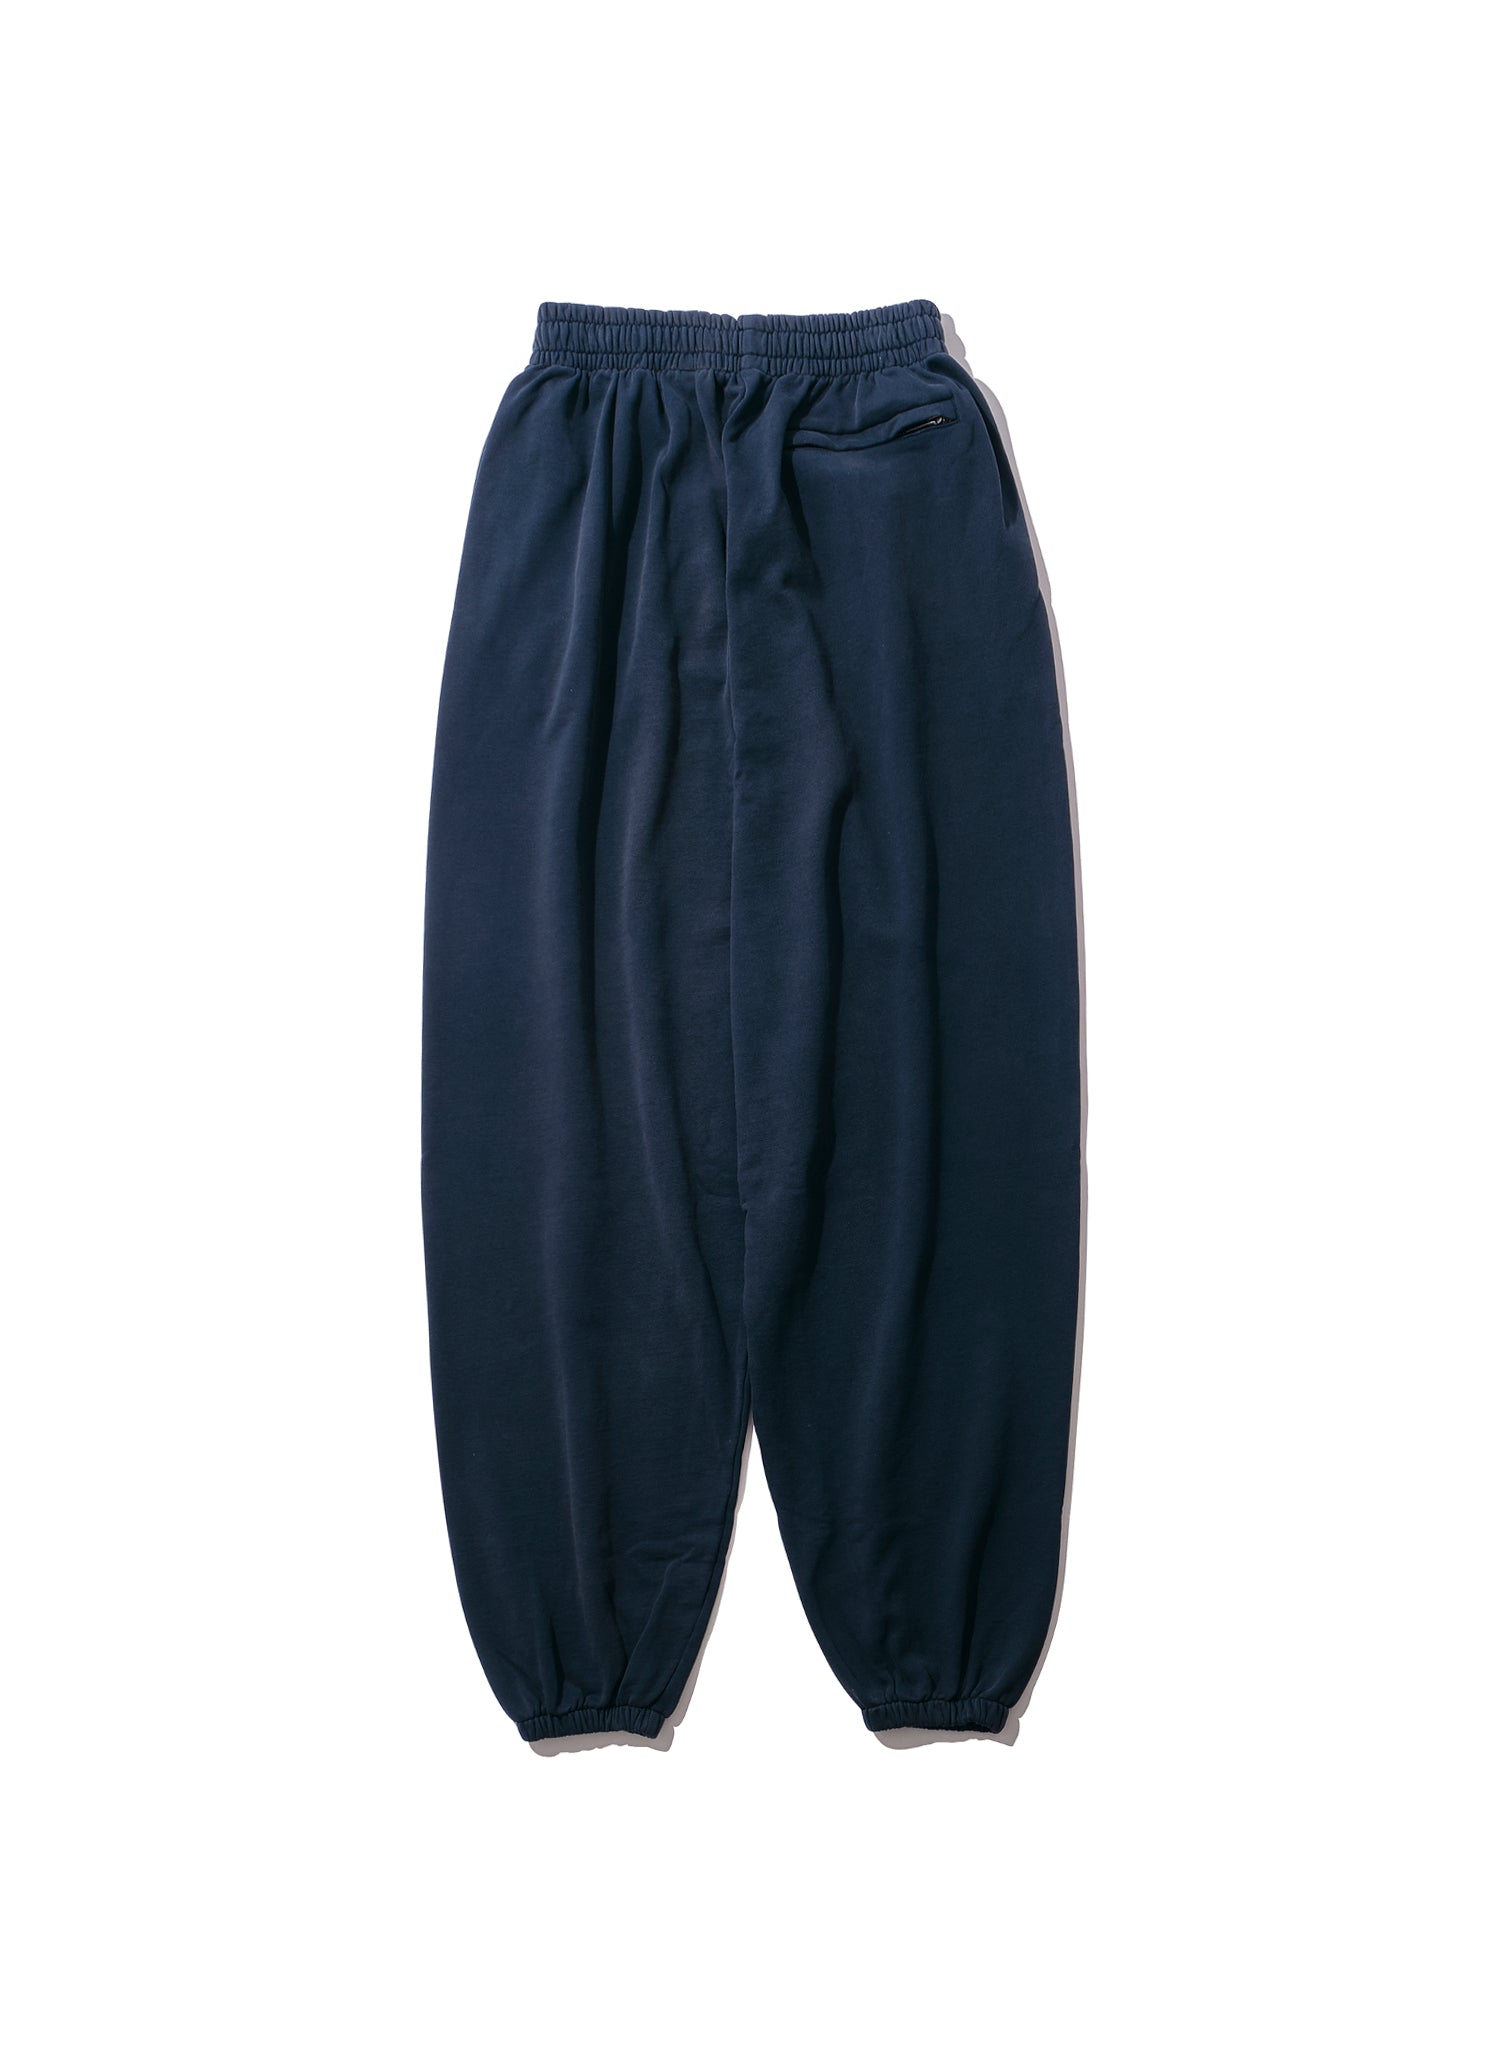 <span style="color: #f50b0b;">Last One</span> 
WILLY CHAVARRIA / BASIC SWEAT PANTS BLUE MOOD